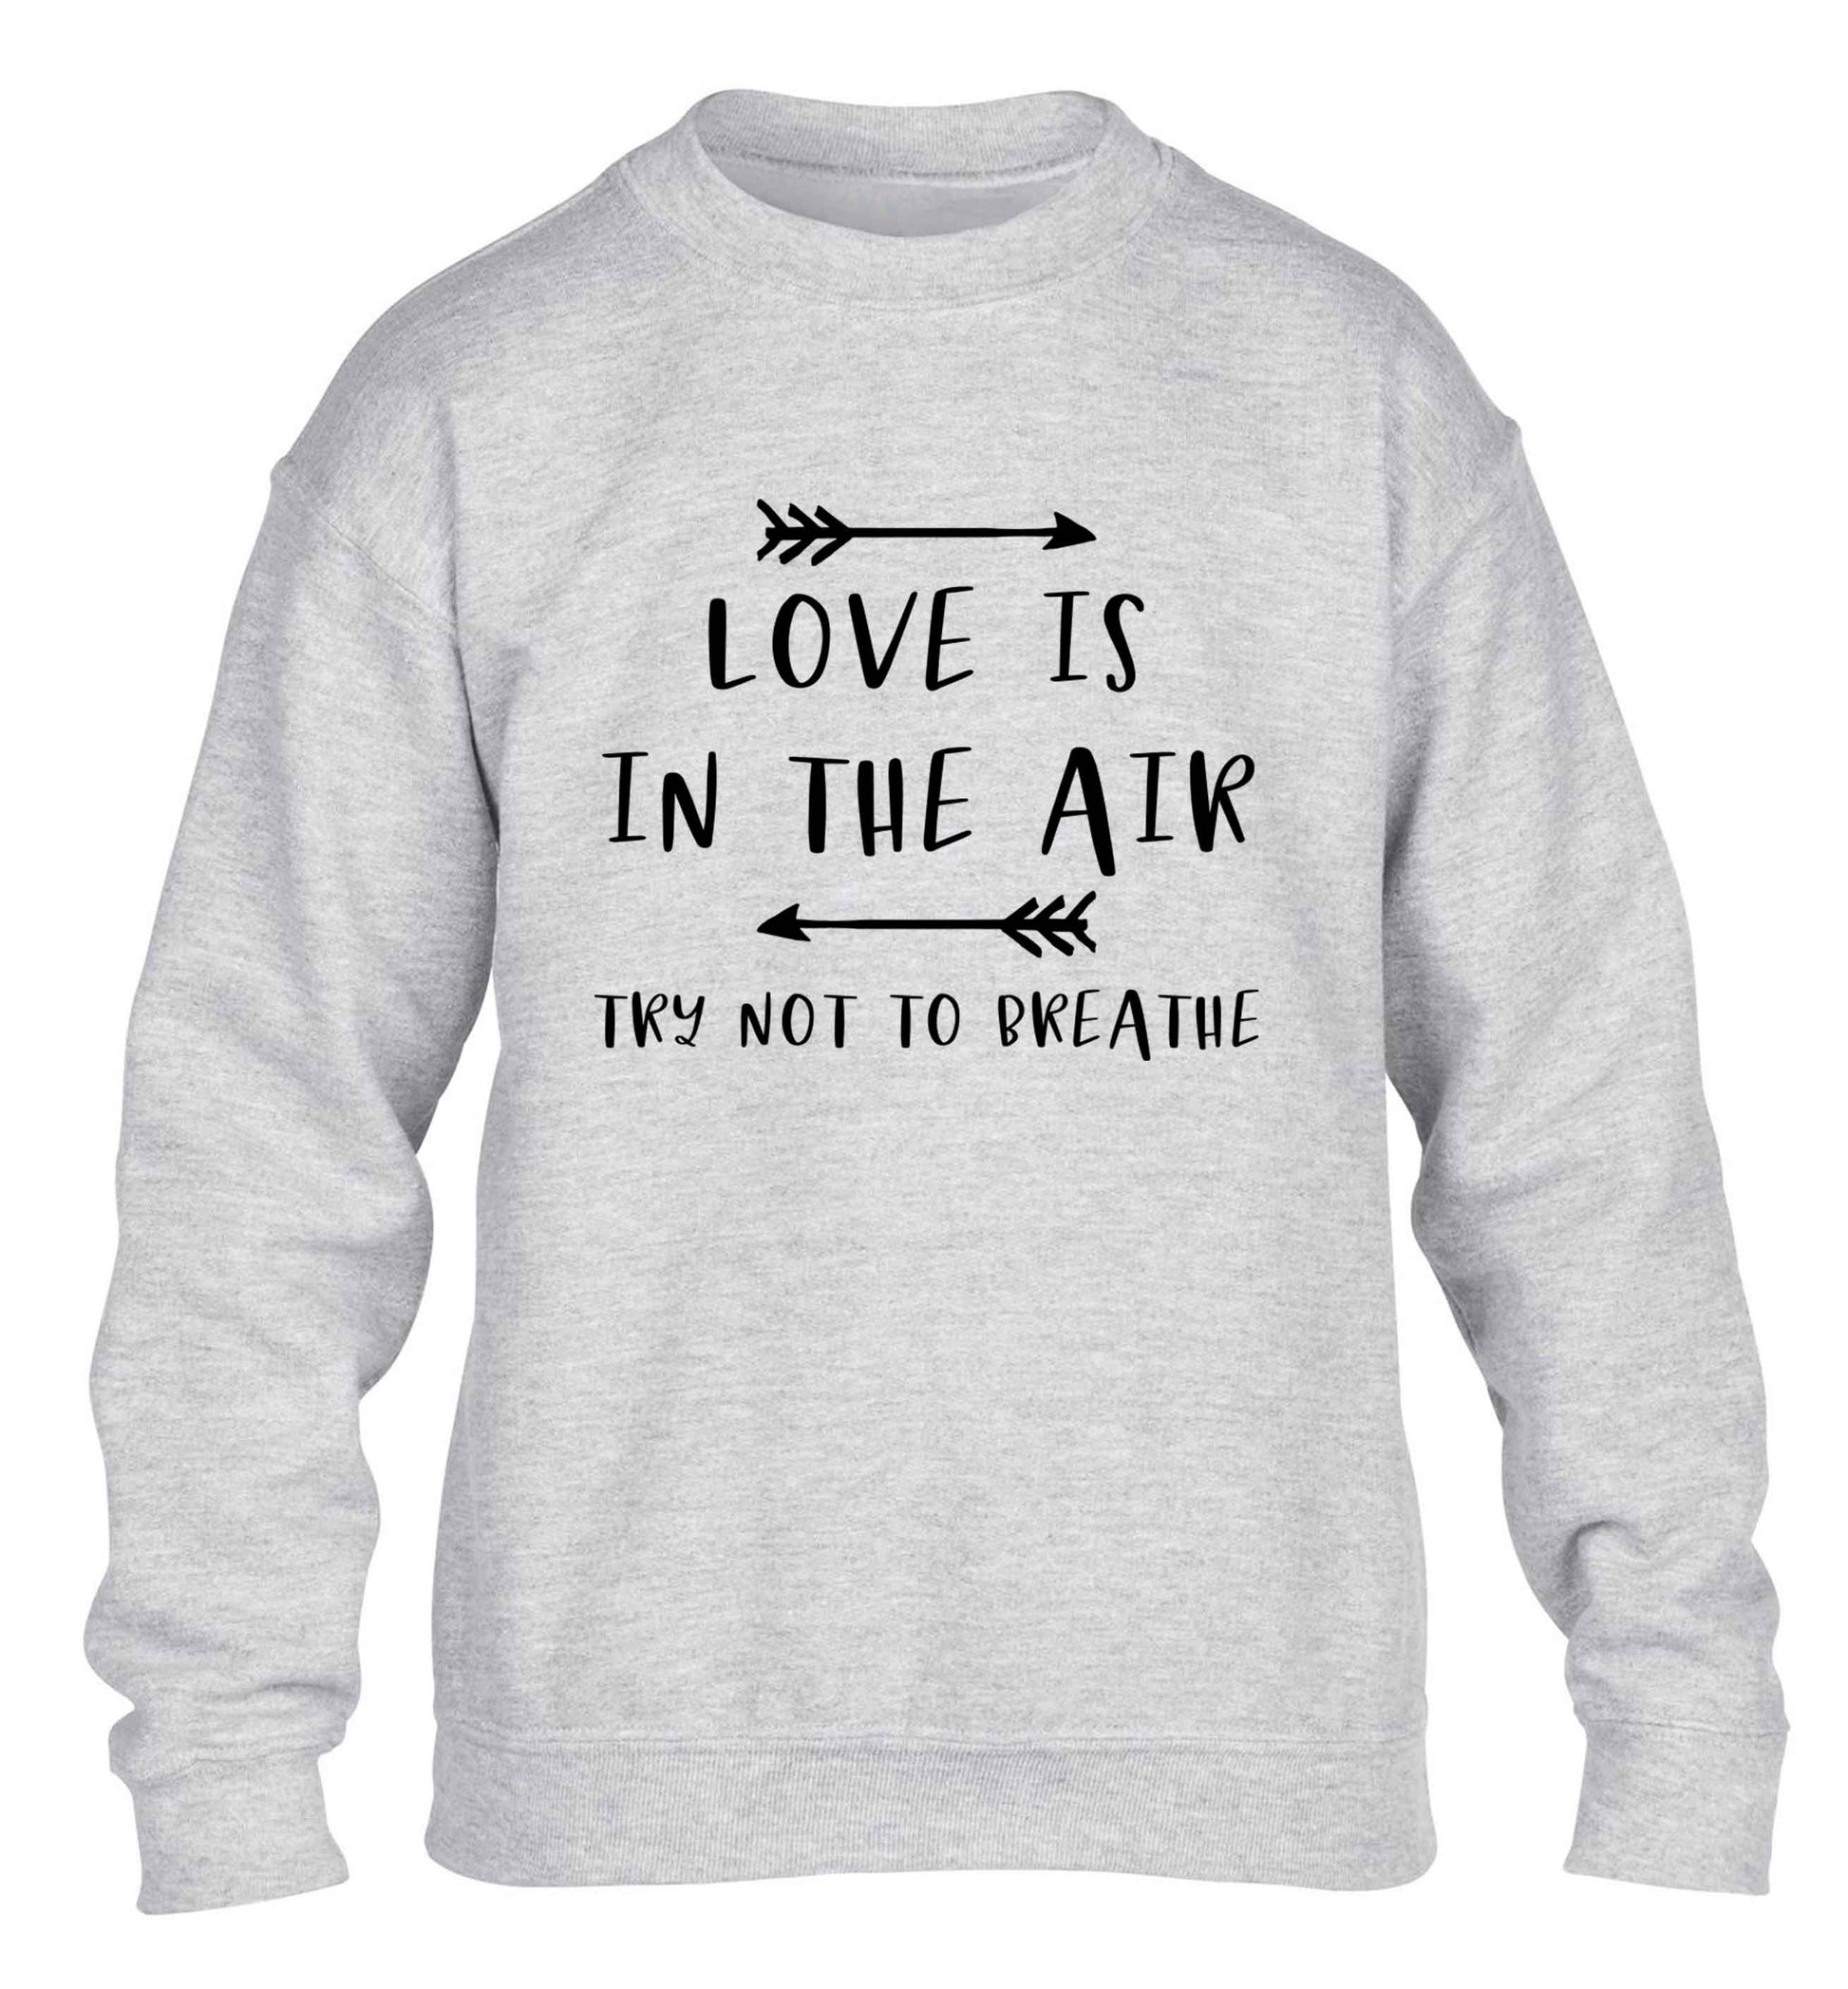 Love is in the air try not to breathe children's grey sweater 12-13 Years